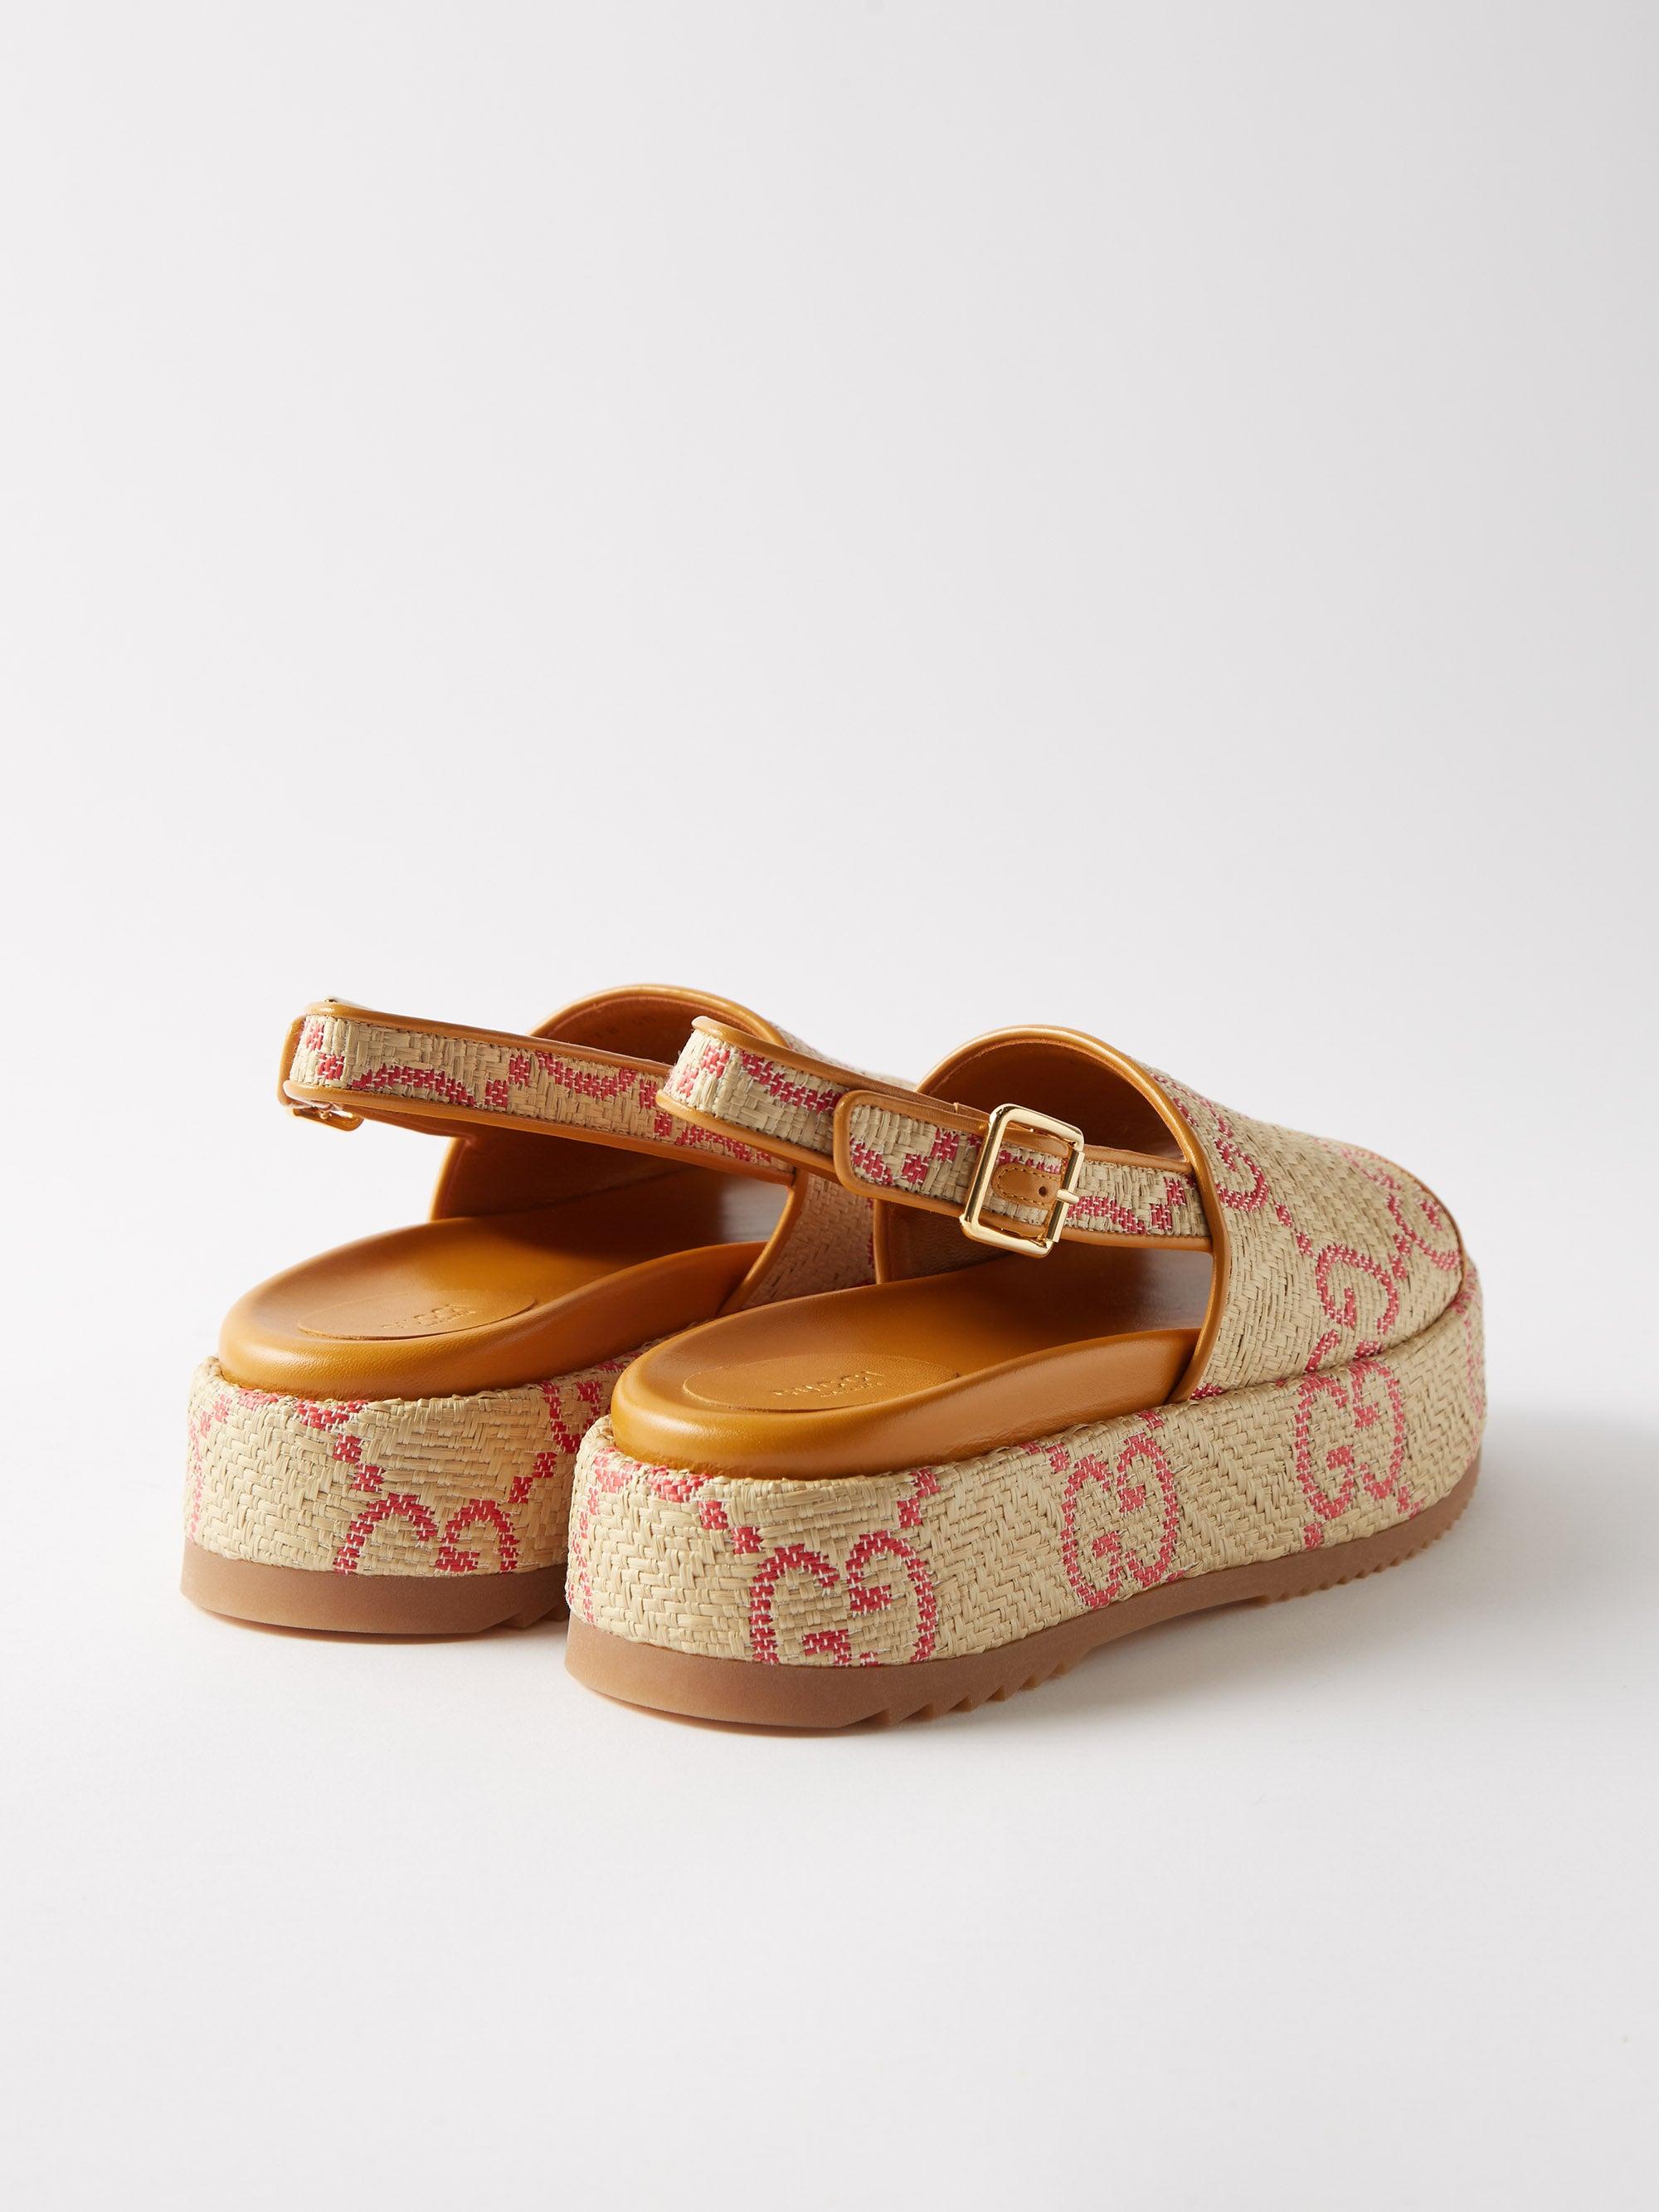 Gucci Angelina Gg-jacquard Canvas Flatform Sandals in Natural | Lyst